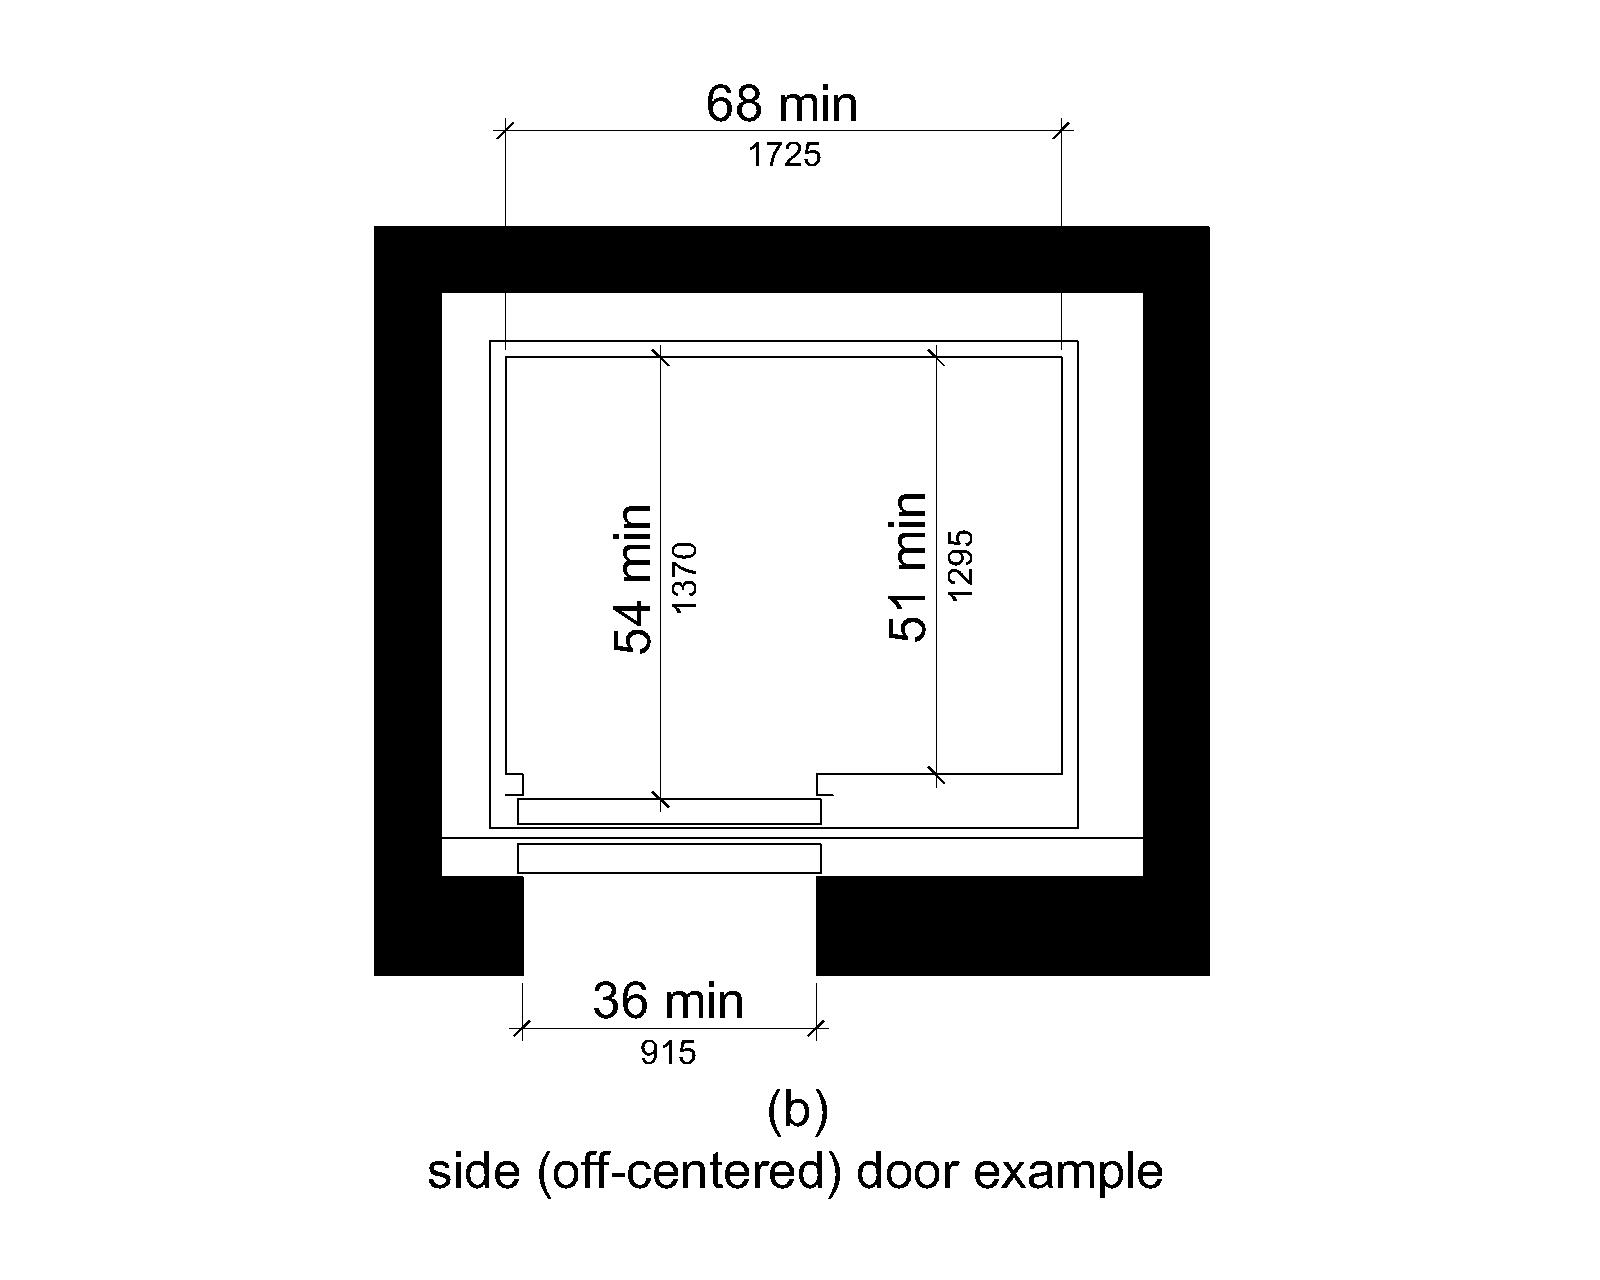 Figure (b) shows an elevator car with an off-centered door example. The door clear width is 36 inches (915 mm) minimum and the car width measured side to side is 68 inches (1725 mm) minimum. The depth is 51 inches (1295 mm) minimum measured from the back wall to the front return, and 54 inches (1370 mm) minimum measured from the back wall to the inside face of the door